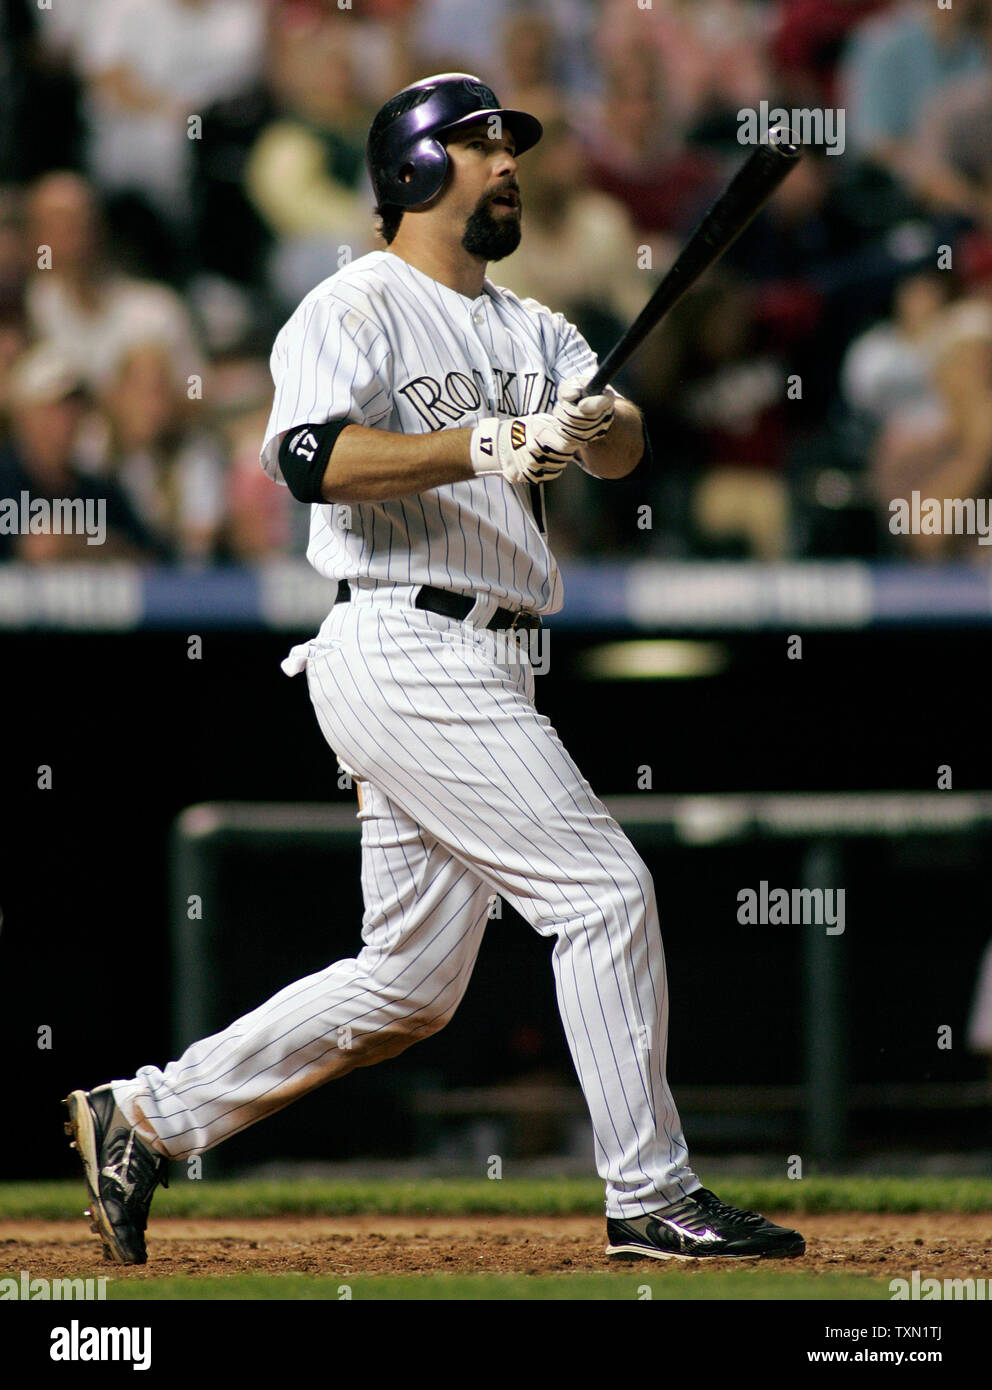 Colorado Rockies batter Todd Helton watches his sixth inning home run  against the San Francisco Giants at Coors Field in Denver on May 11, 2007.  Helton finished the game with a .397